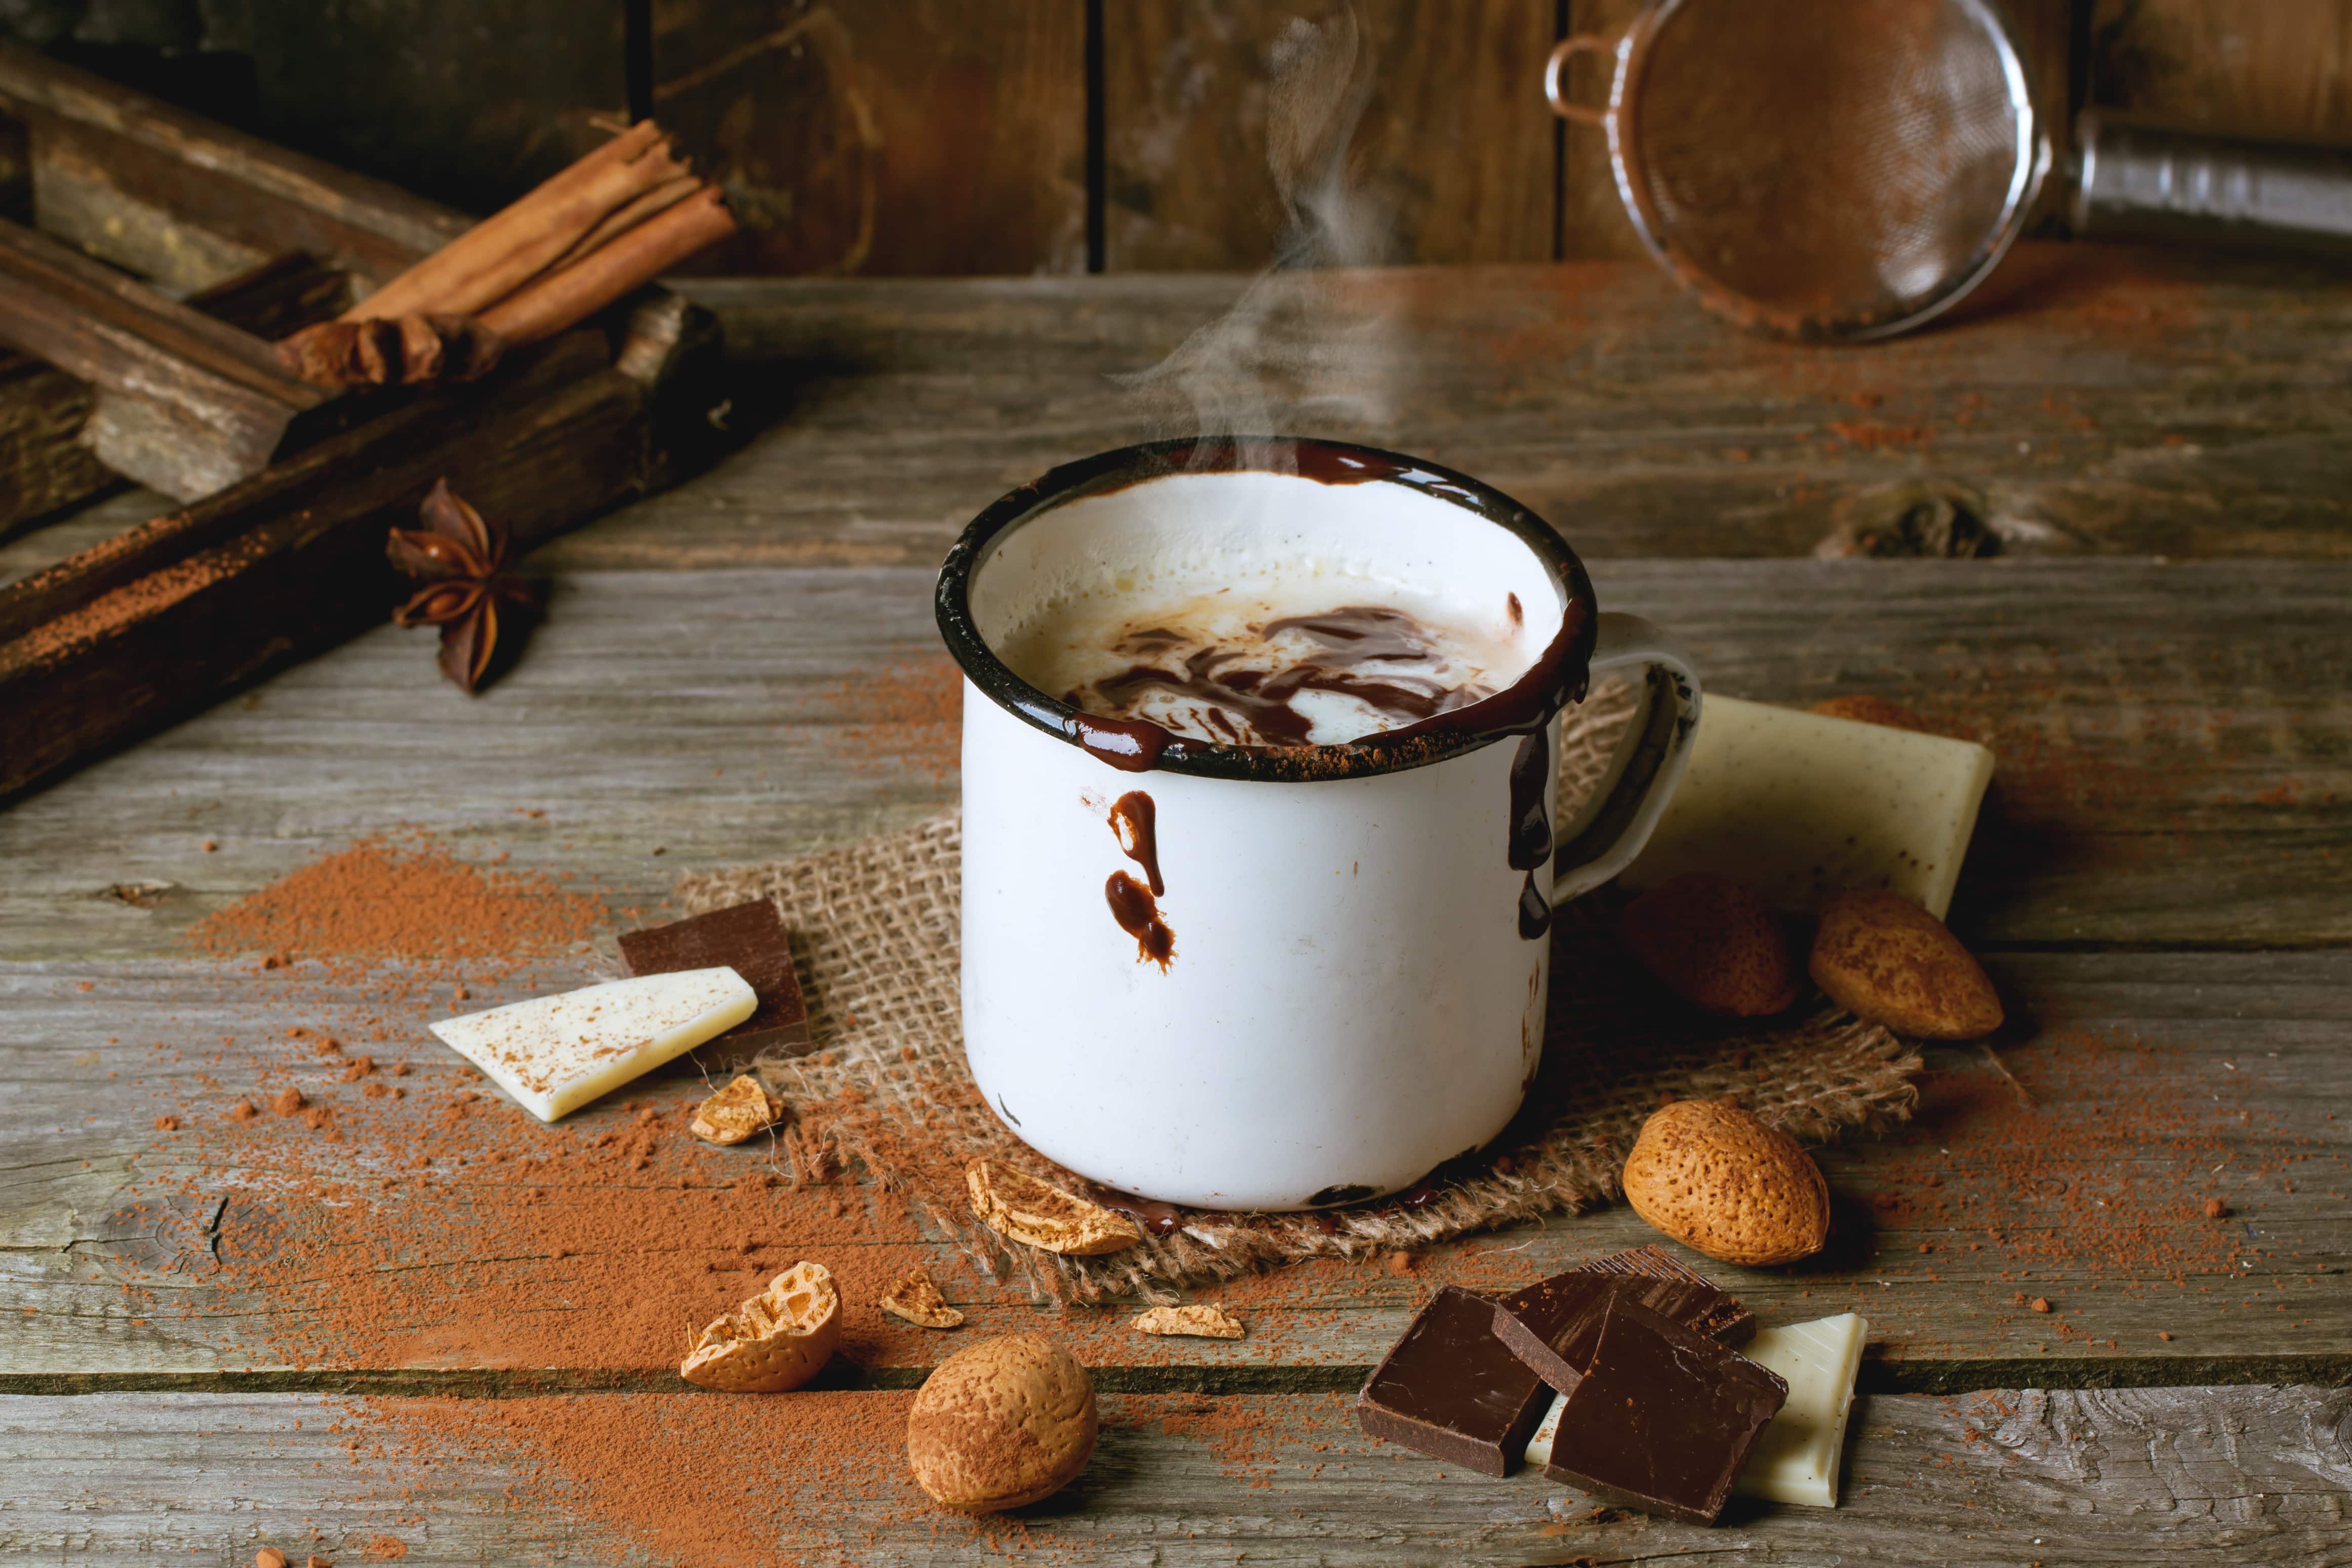 Vintage mug with hot chocolate served with chunks of white and dark chocolate and almonds on old wooden table